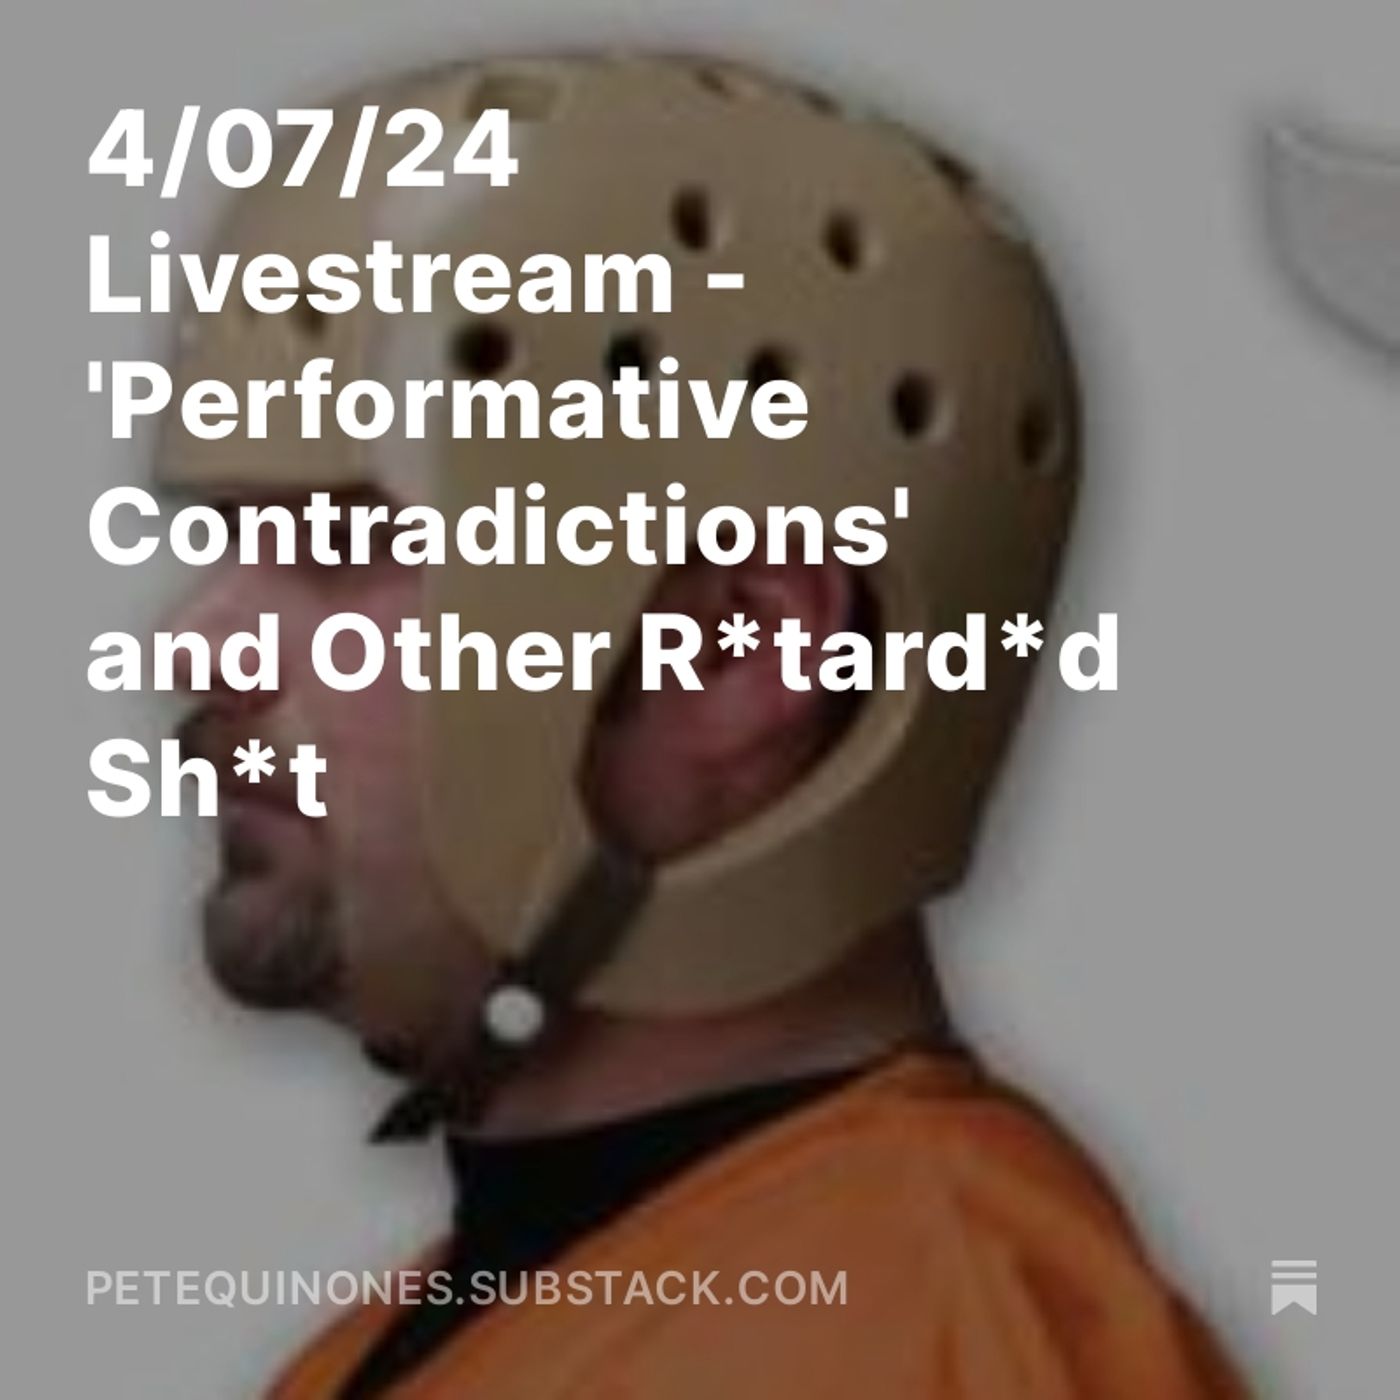 4/07/24 Livestream - 'Performative Contradictions' and Other R*tard*d Sh*t